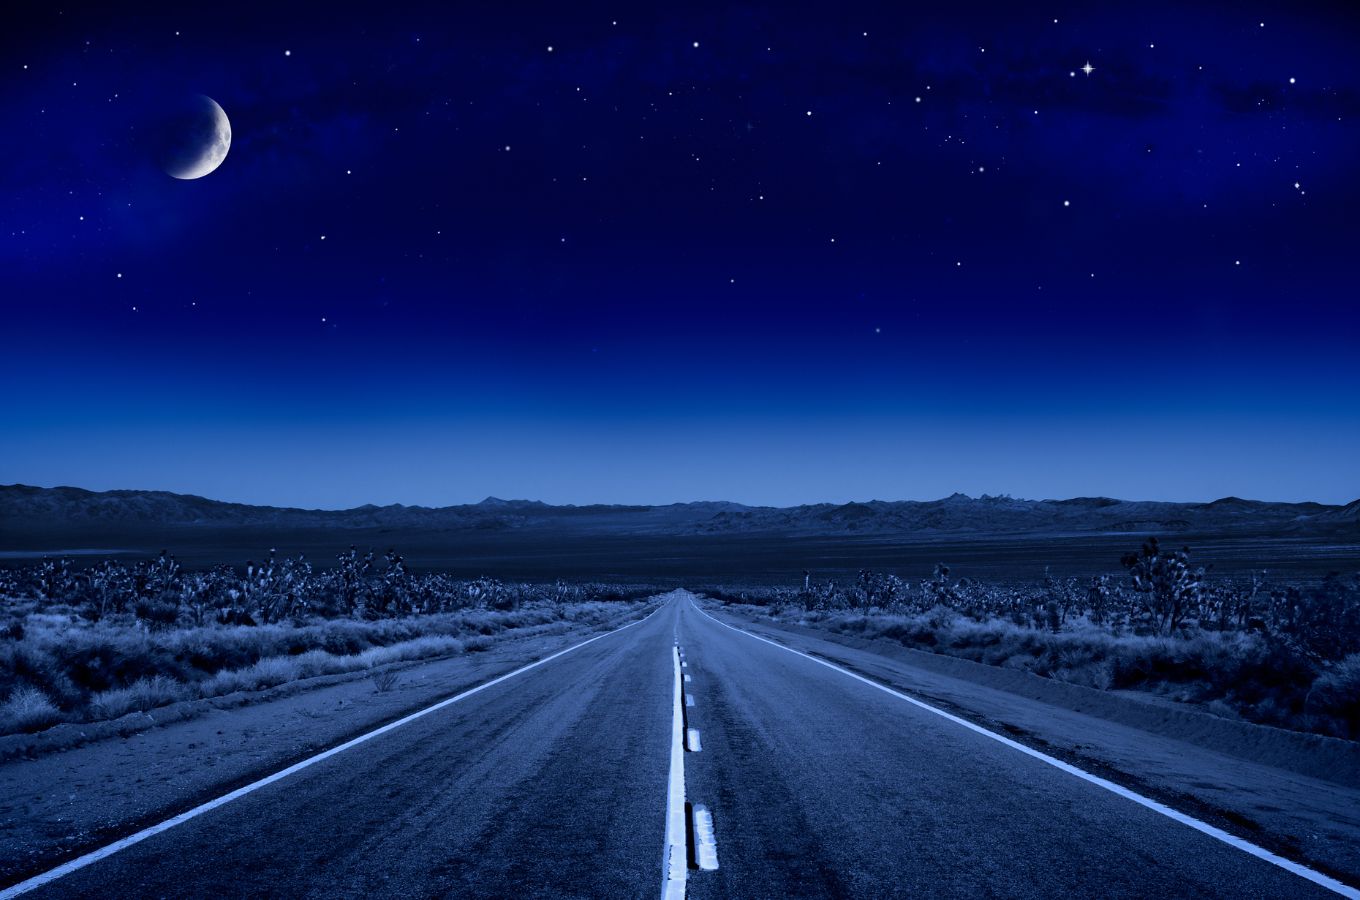 a desolate stretch of road in the desert at night